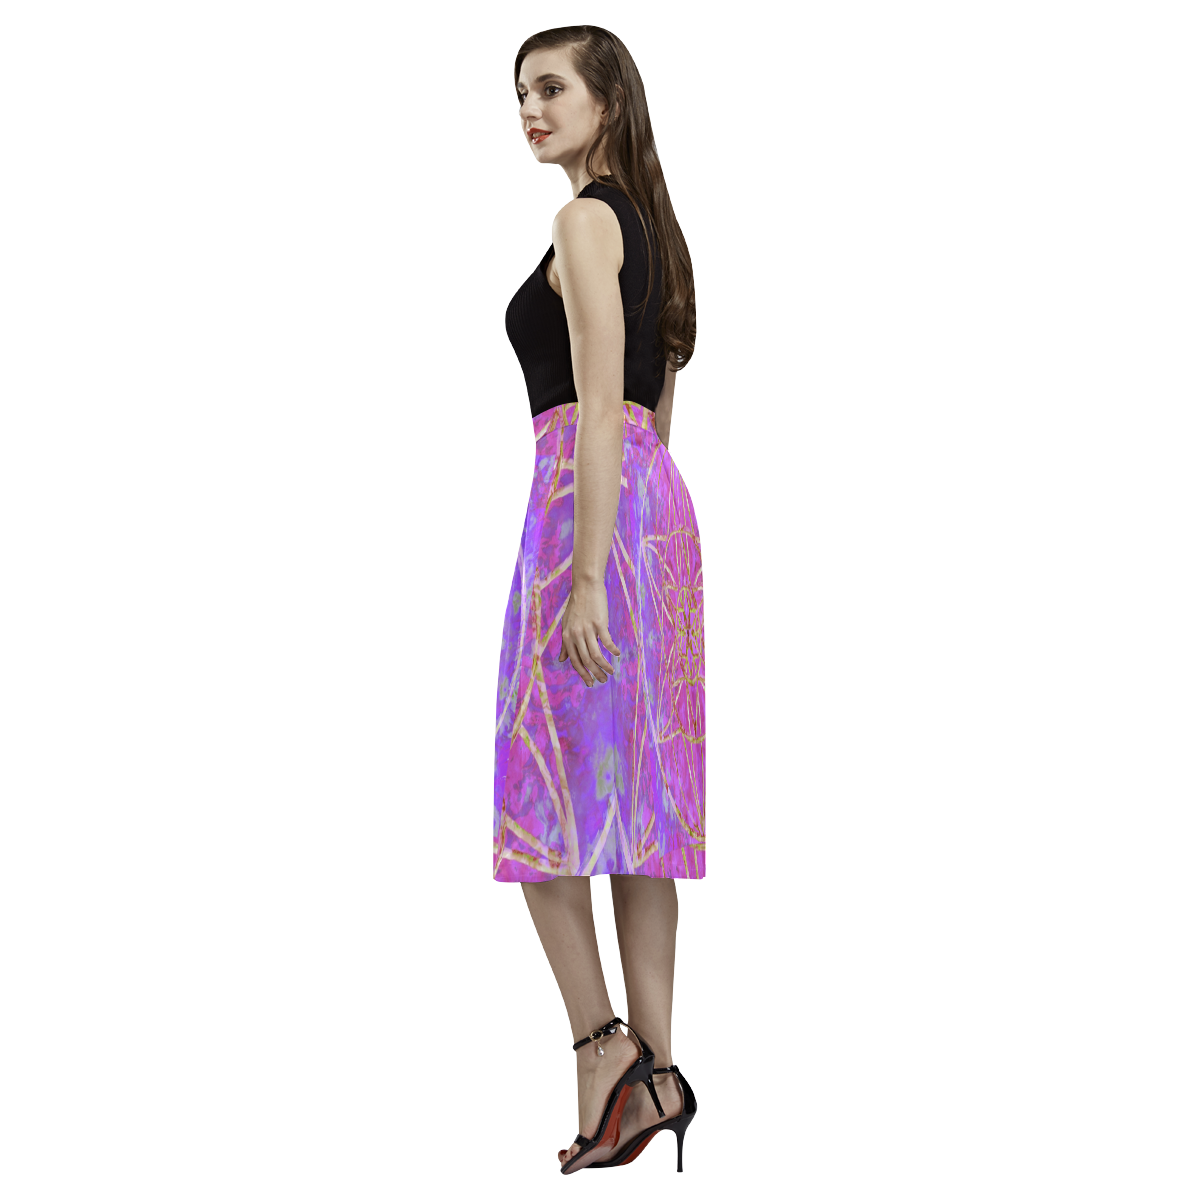 protection in purple colors Aoede Crepe Skirt (Model D16)